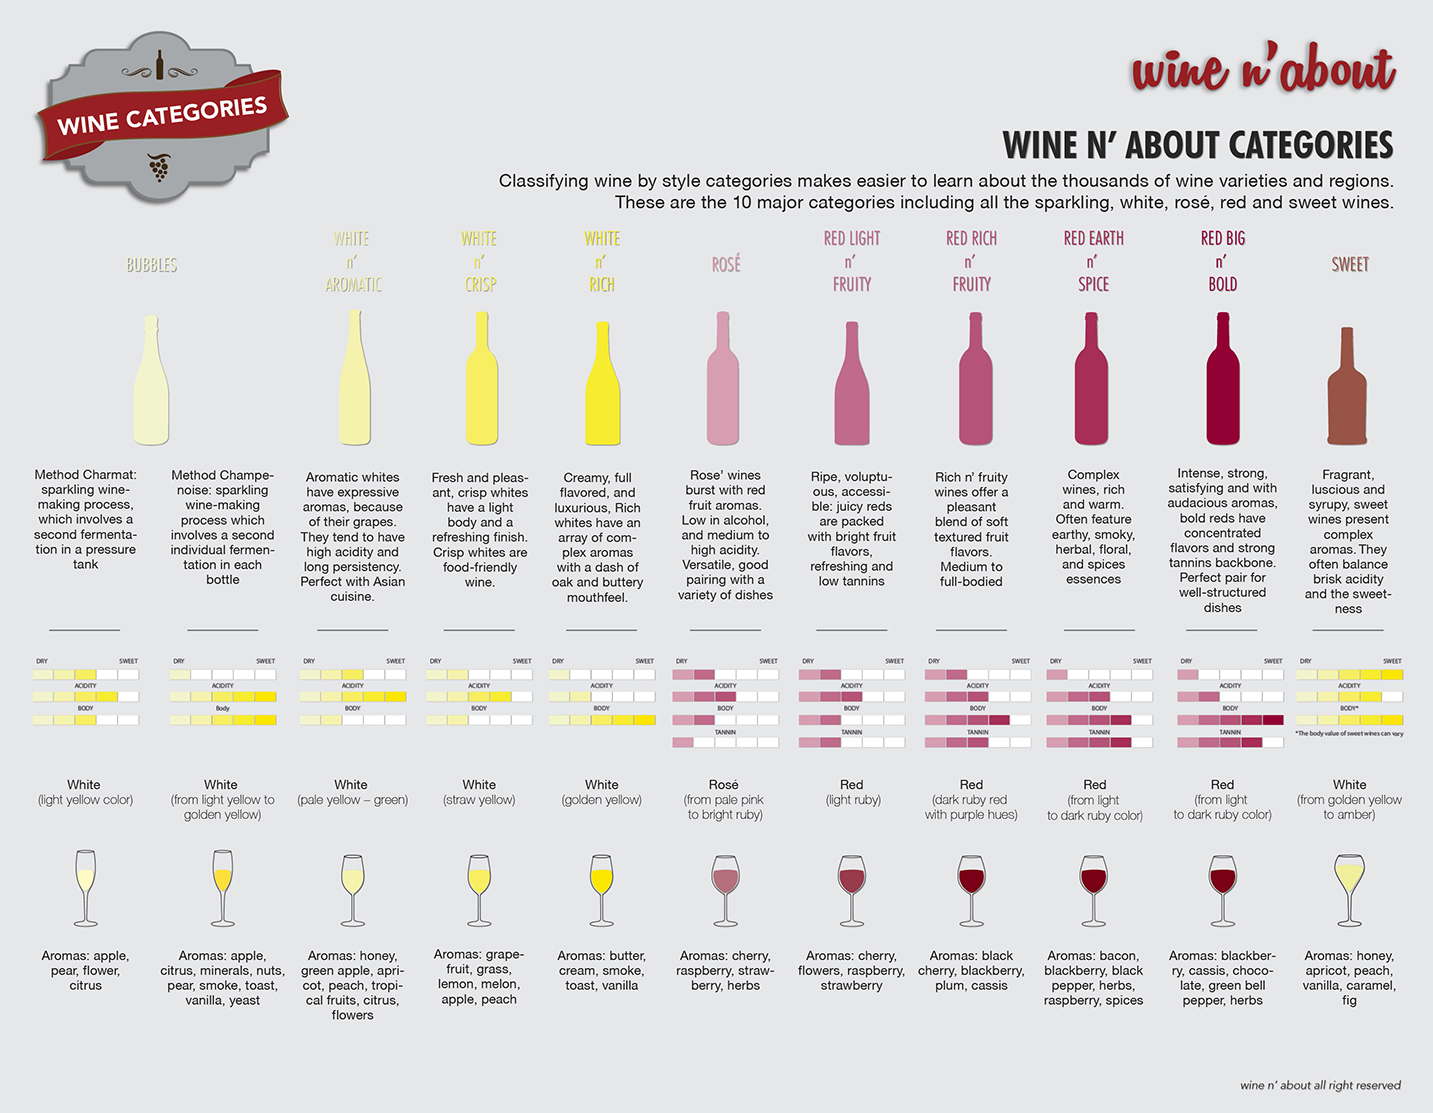 wine n' about categories